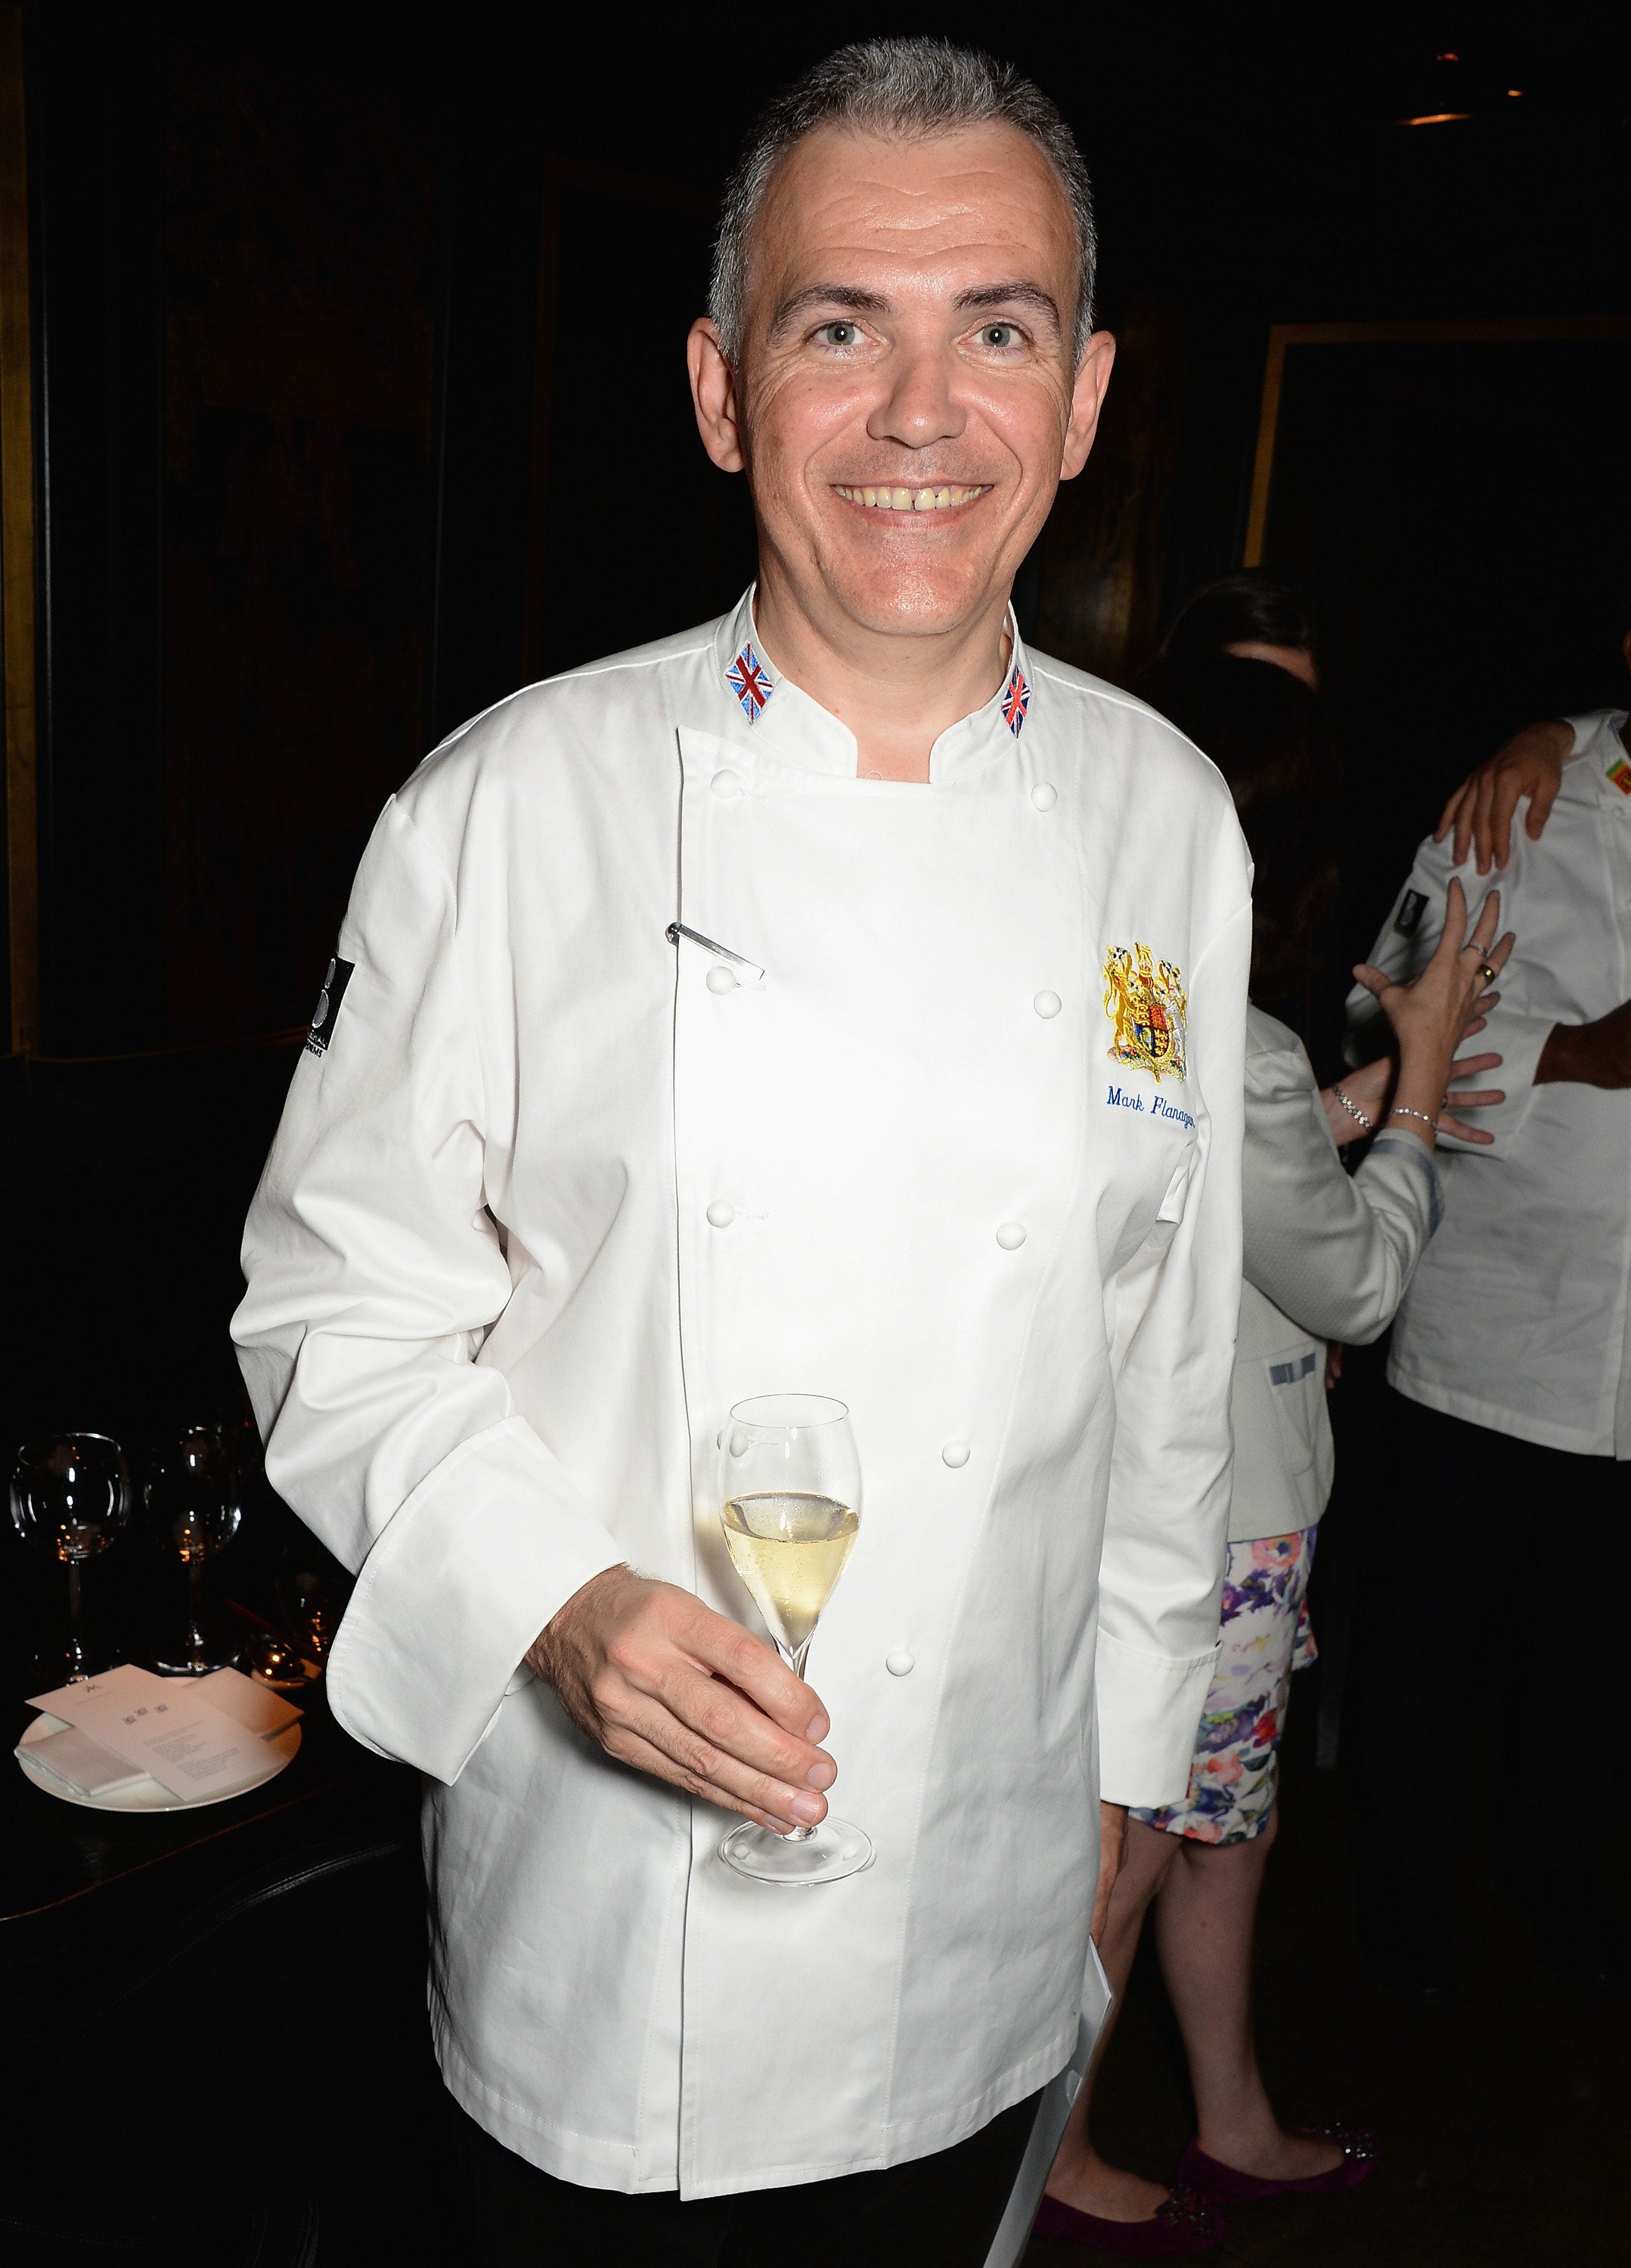 Flanagan at the annual gathering of the Le Club des Chefs